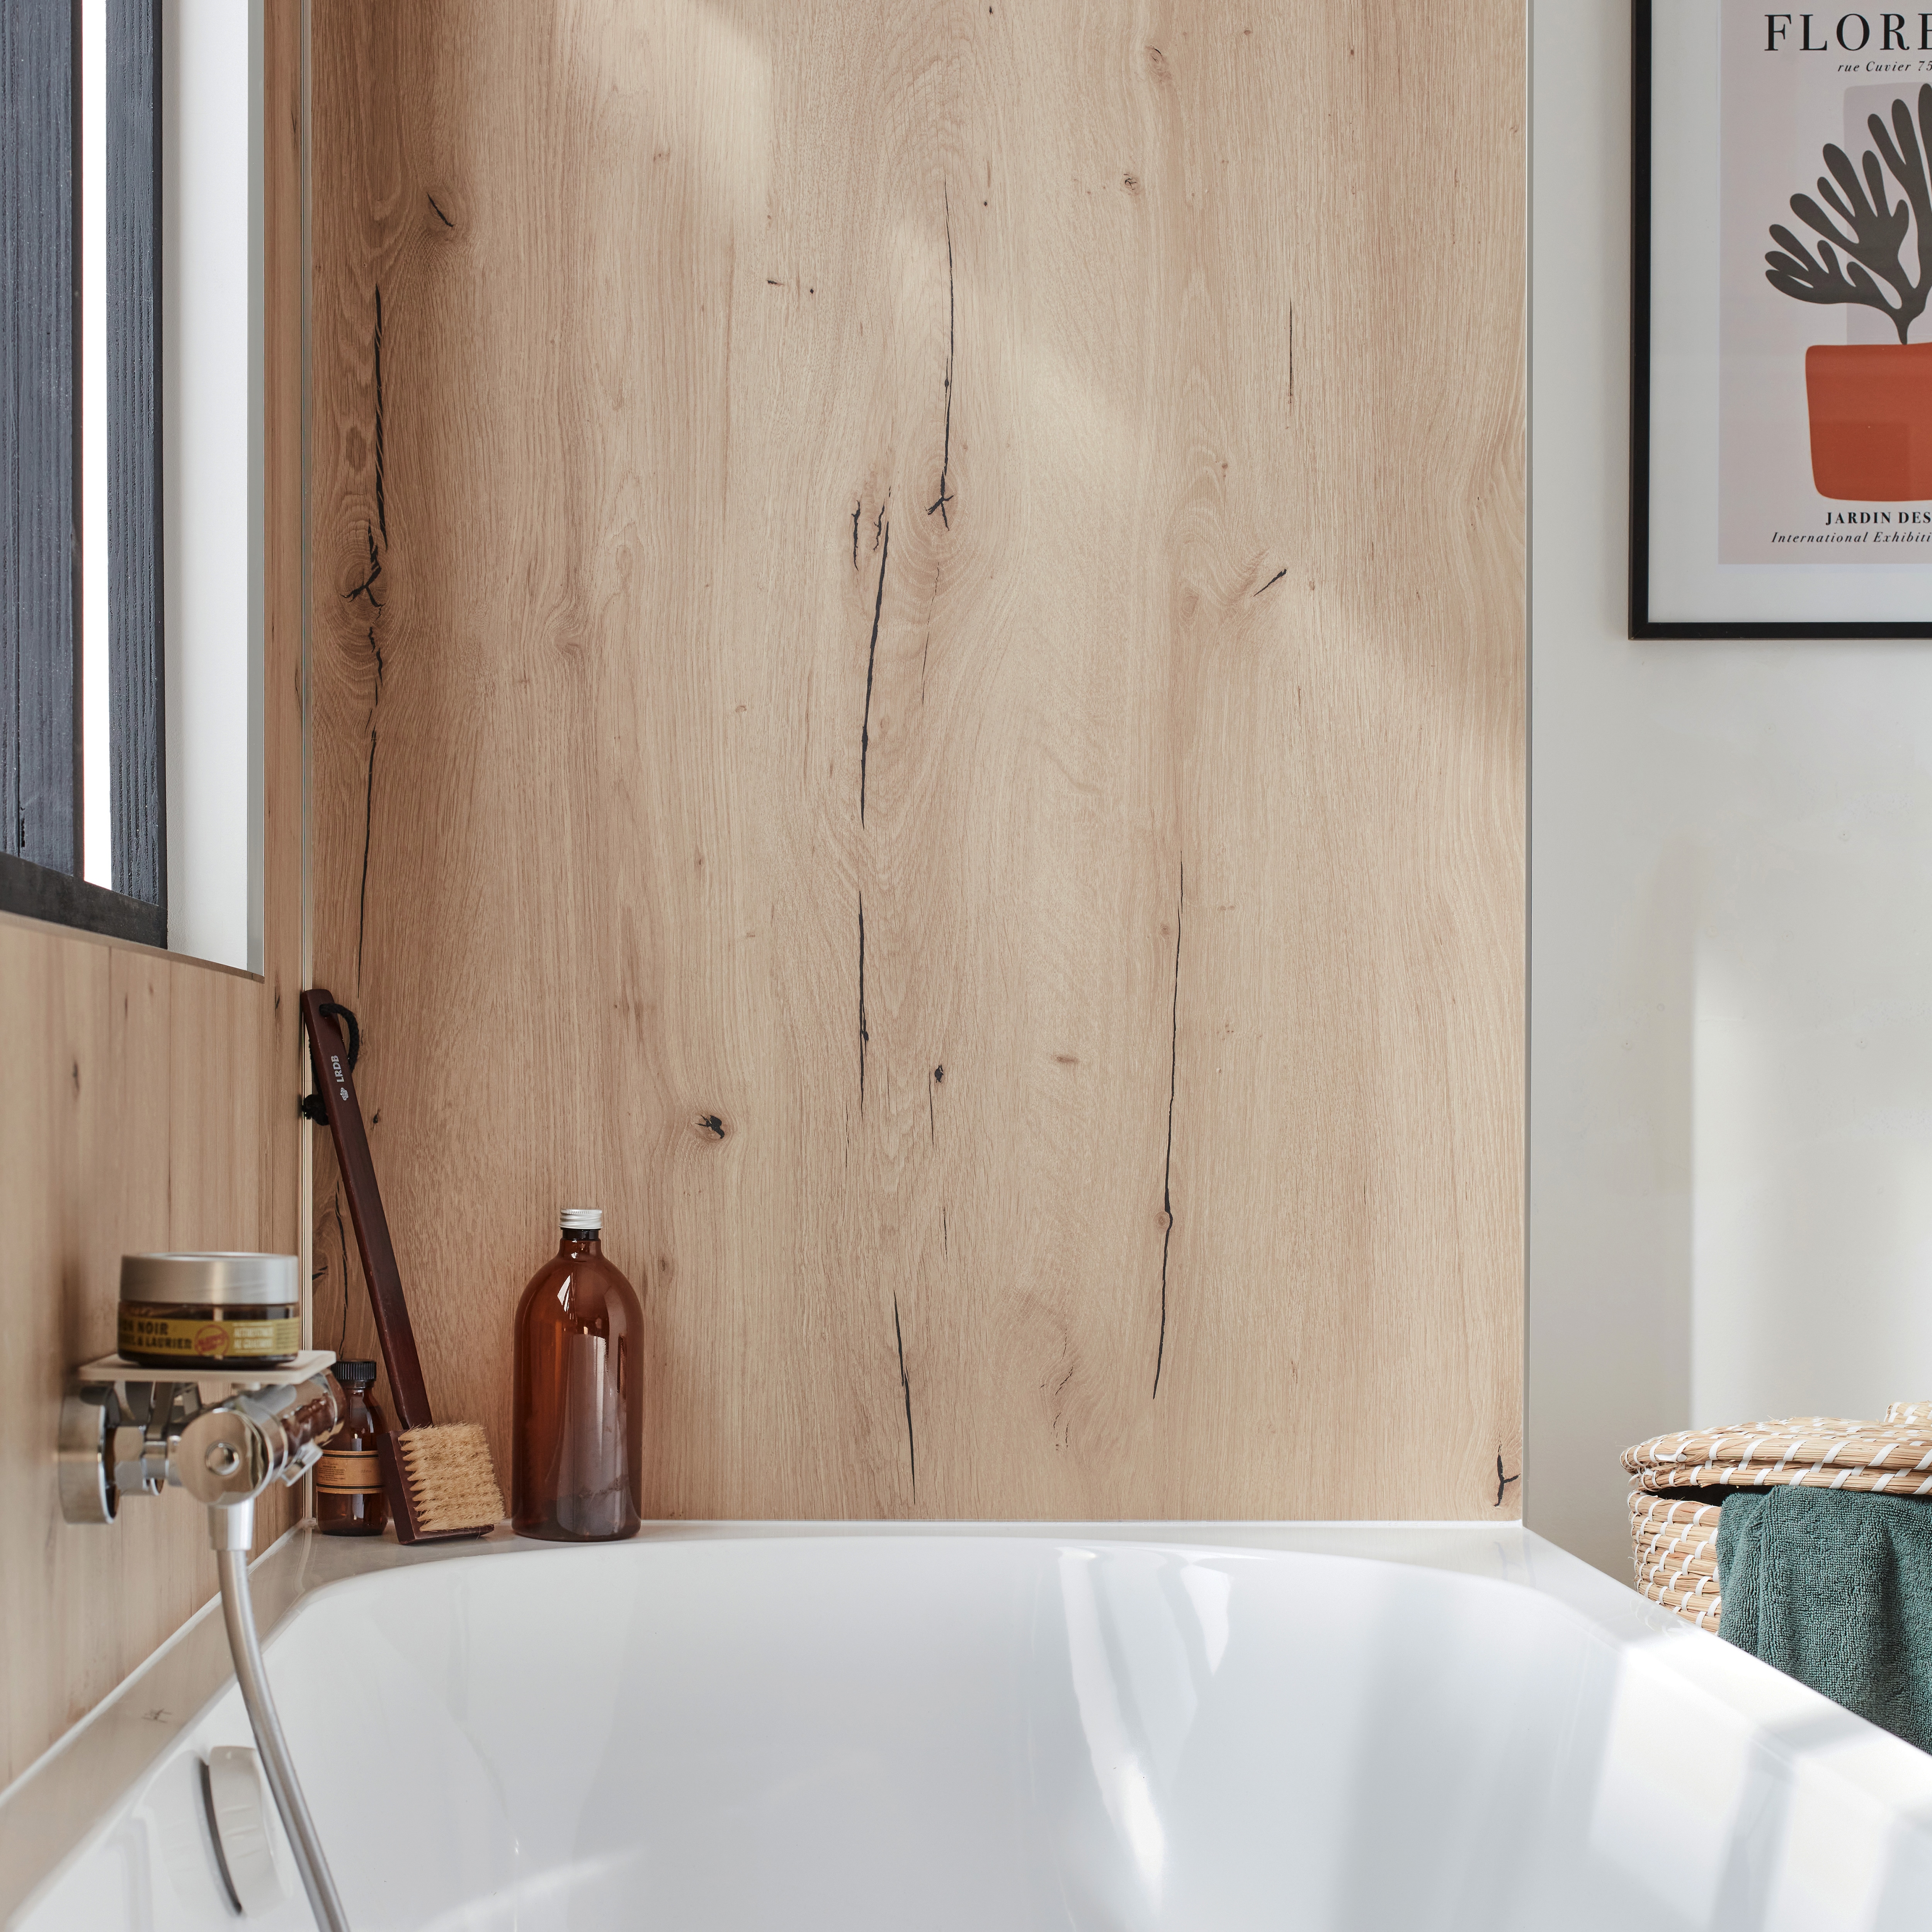 With Jacob Delafon, nothing is left to chance, whether it is the elegance  factor on our toilets, or the 10-year guarantee we commit to! Since  fixtures can be essential yet stylish, discover our half bathrooms